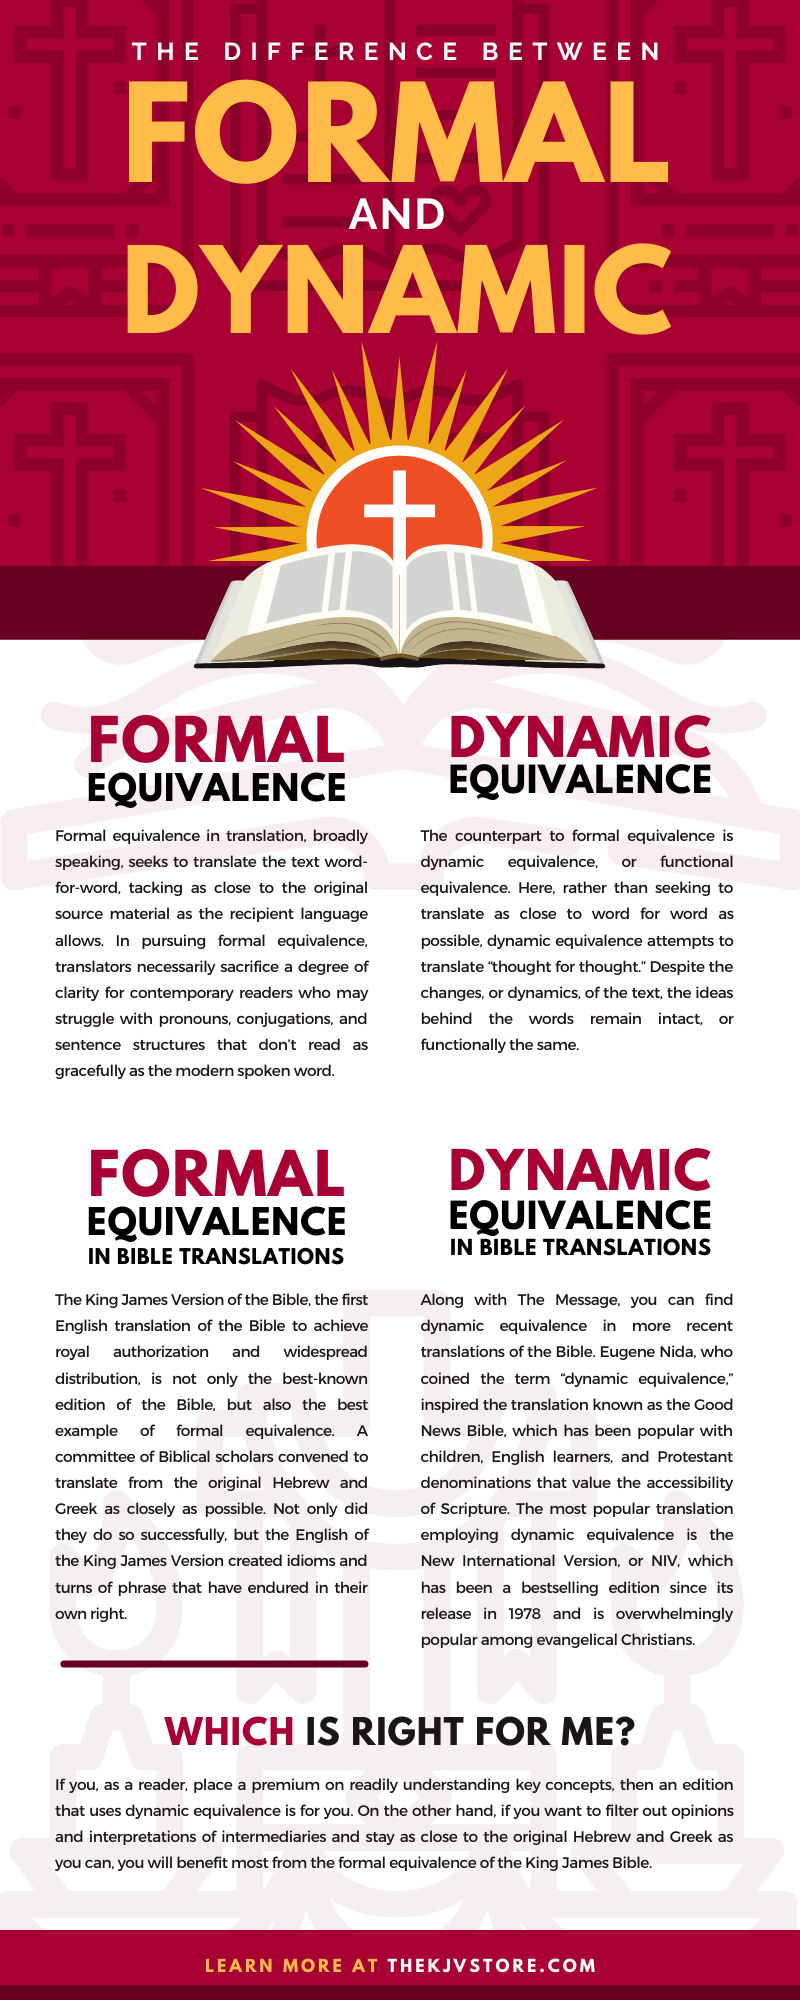 The Difference Between Formal and Dynamic Equivalence